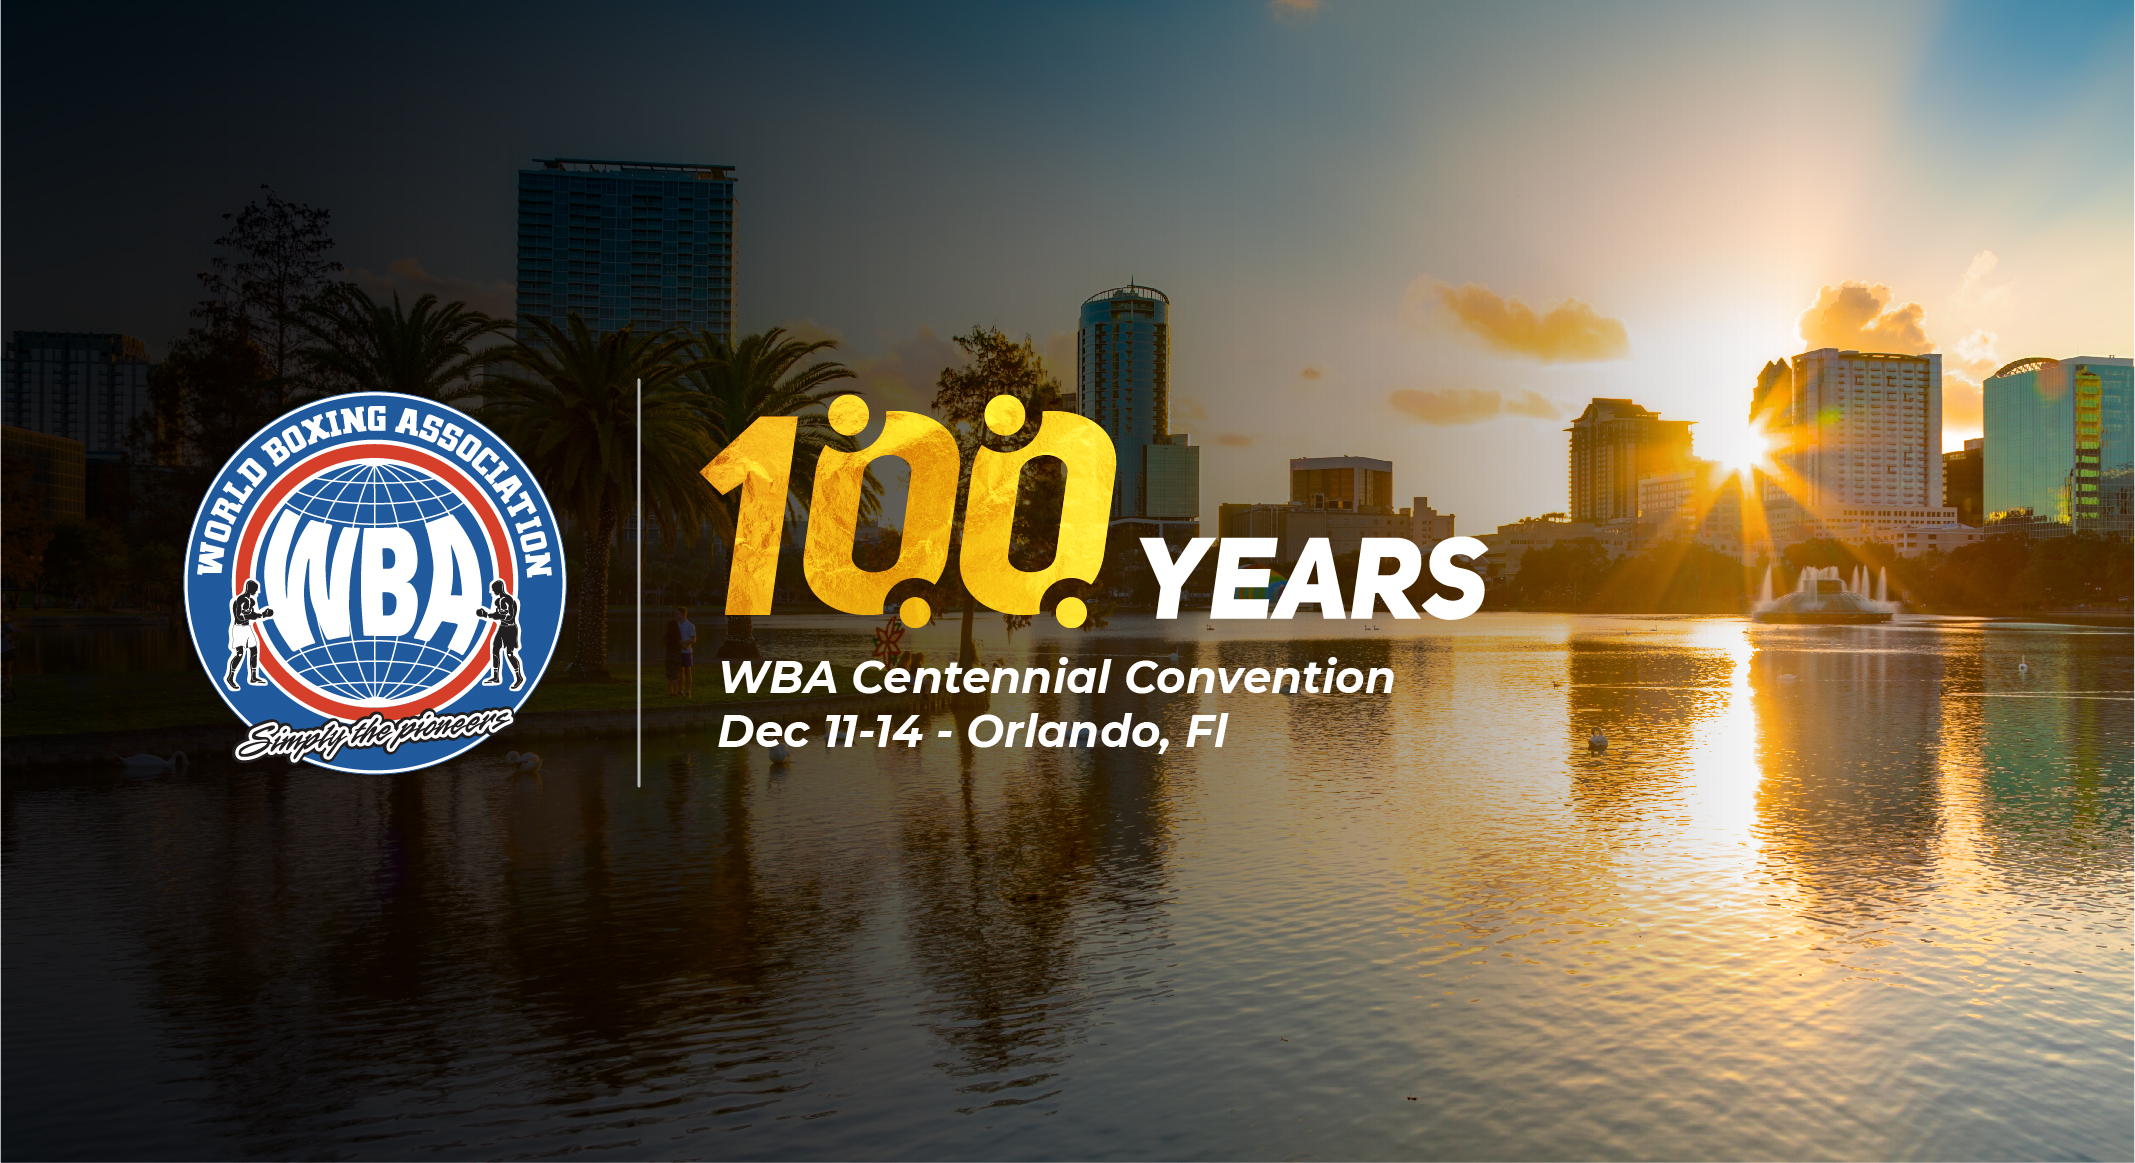 Registration for the WBA Centennial Convention is officially open 